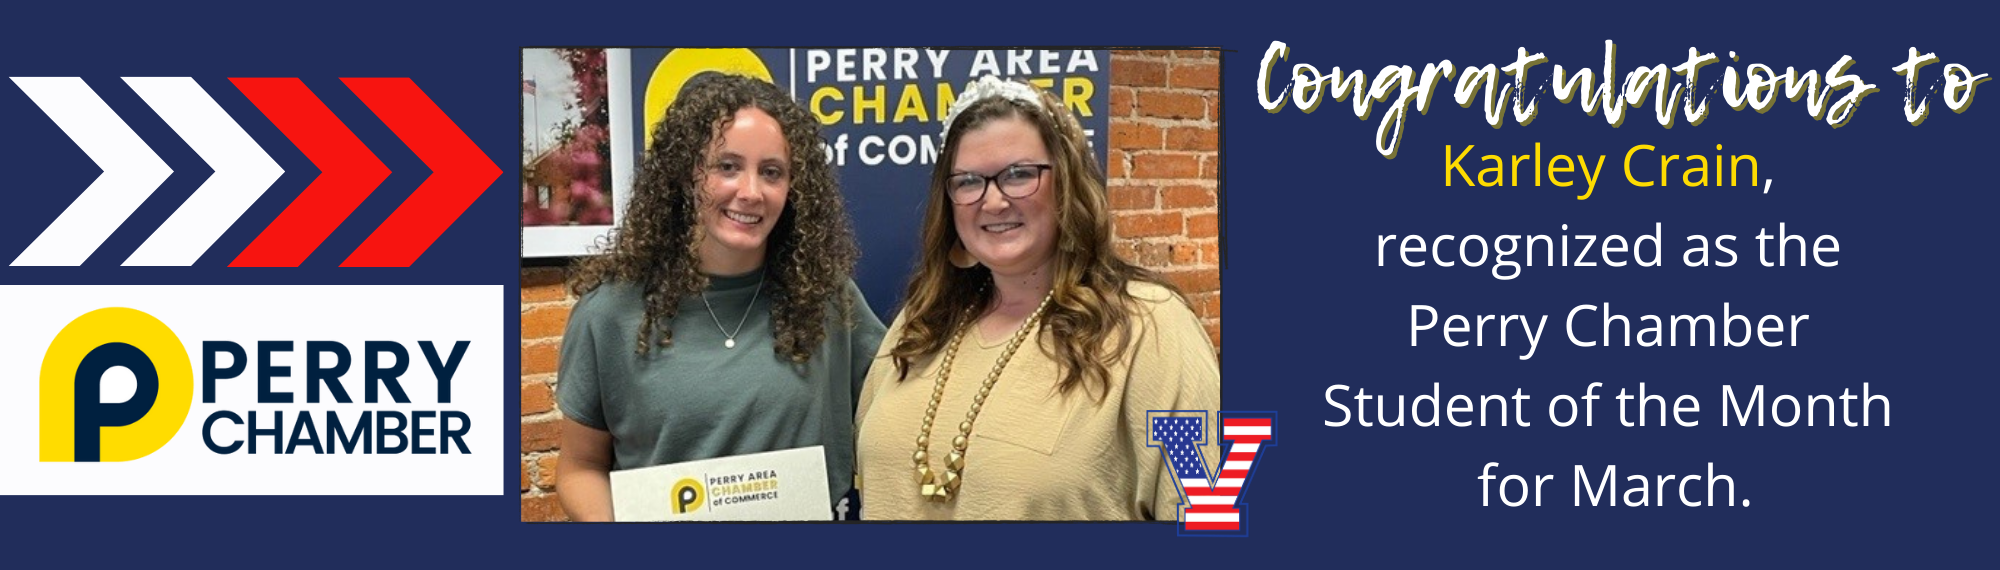 Perry Chamber SOTM March